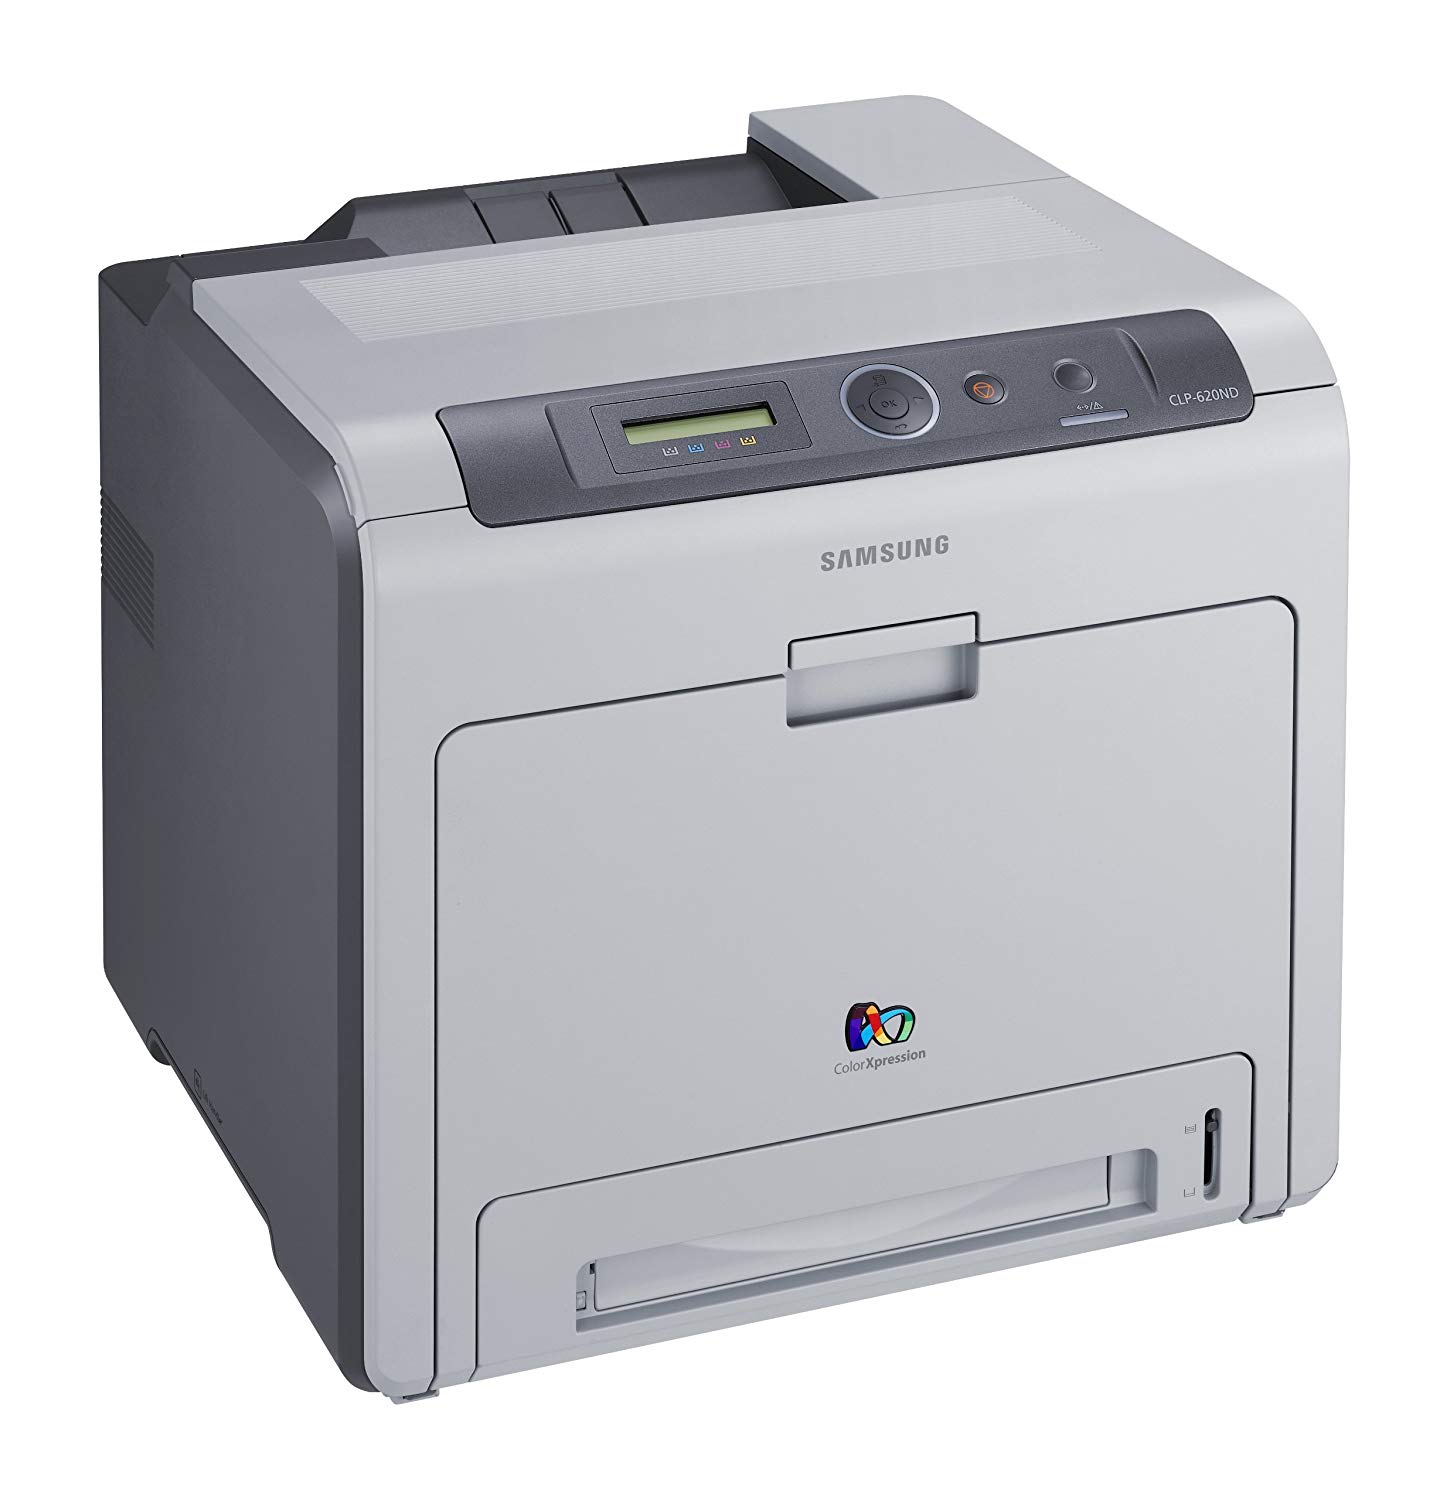 Samsung clp-620nd driver for mac free